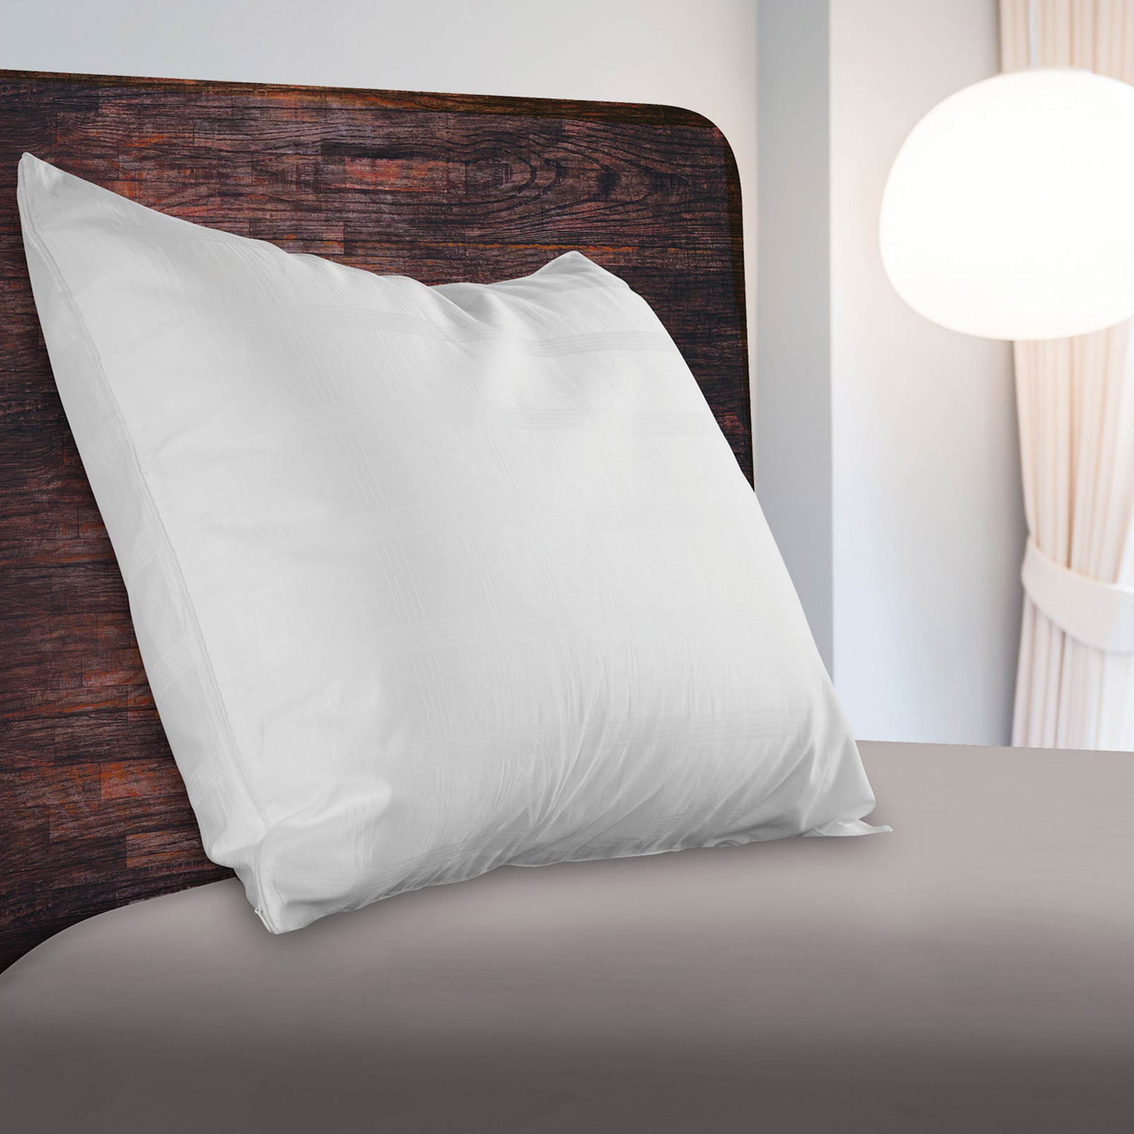 Sealy Luxury Cotton Pillow Protector - Image 7 of 7